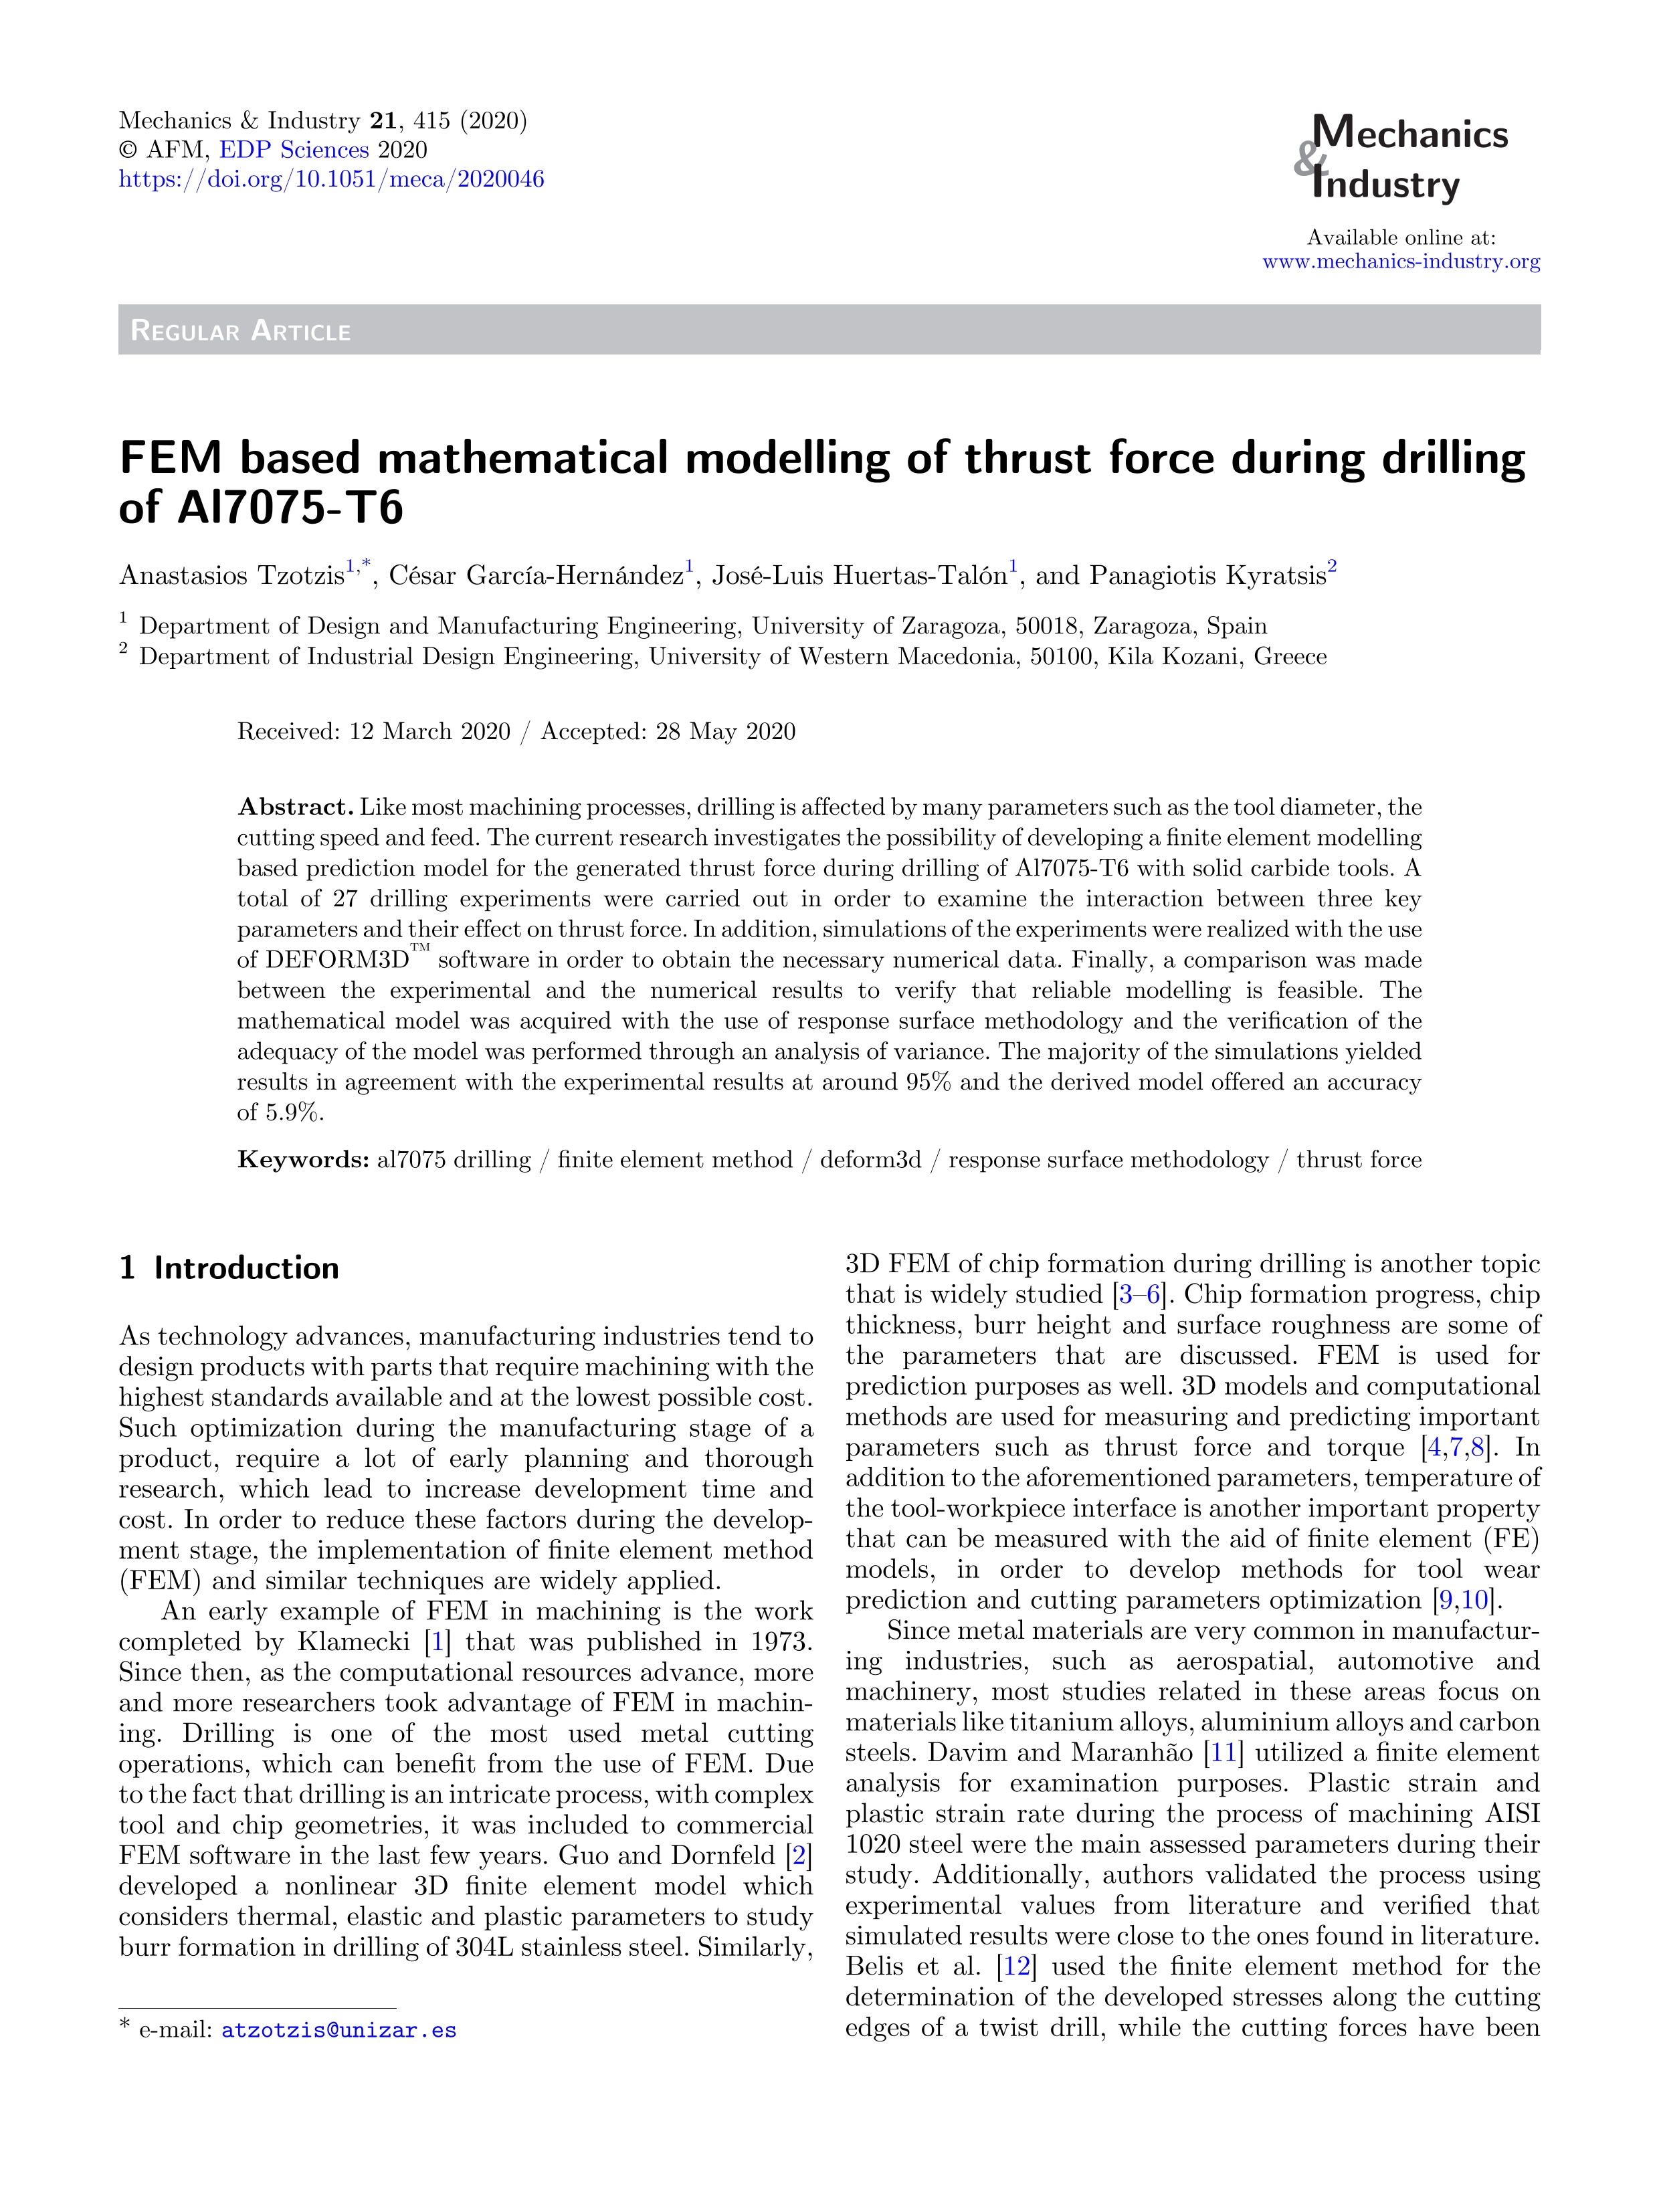 FEM based mathematical modelling of thrust force during drilling of Al7075-T6